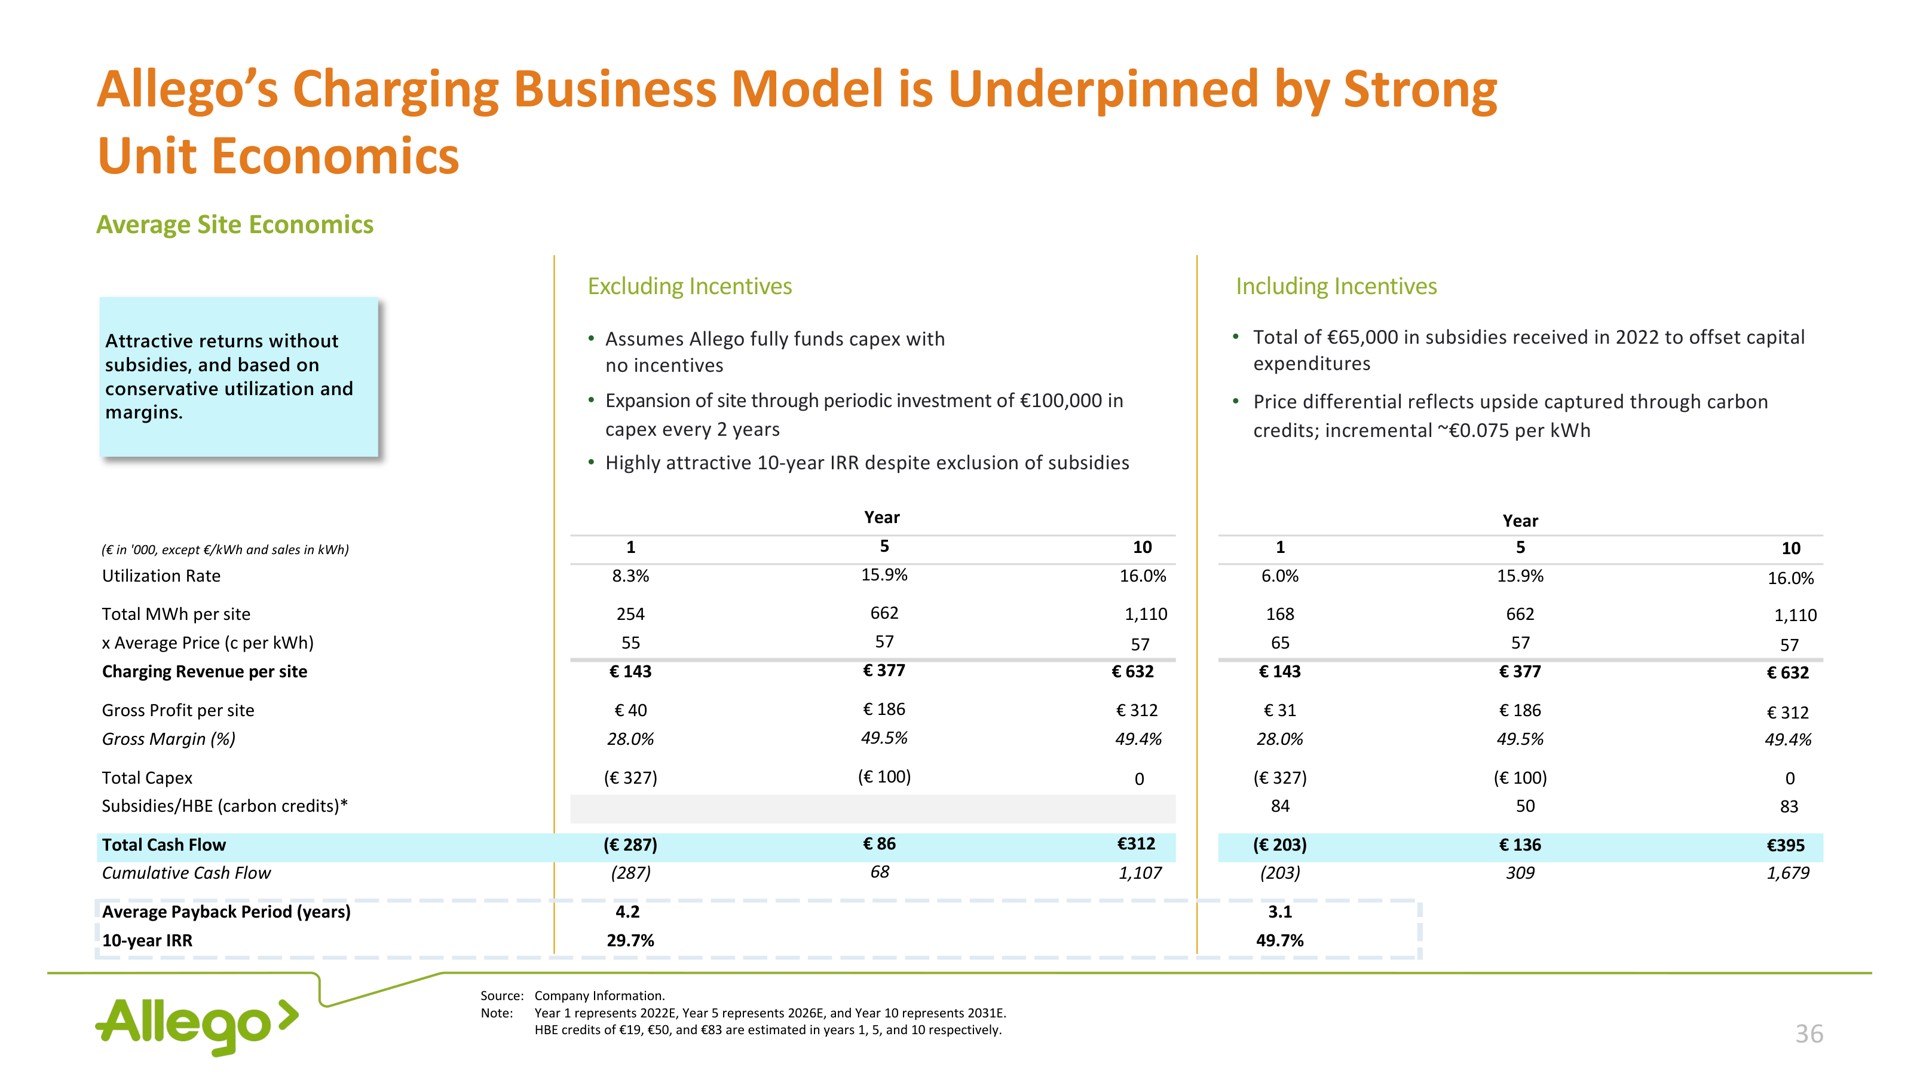 charging business model is underpinned by strong unit economics | Allego